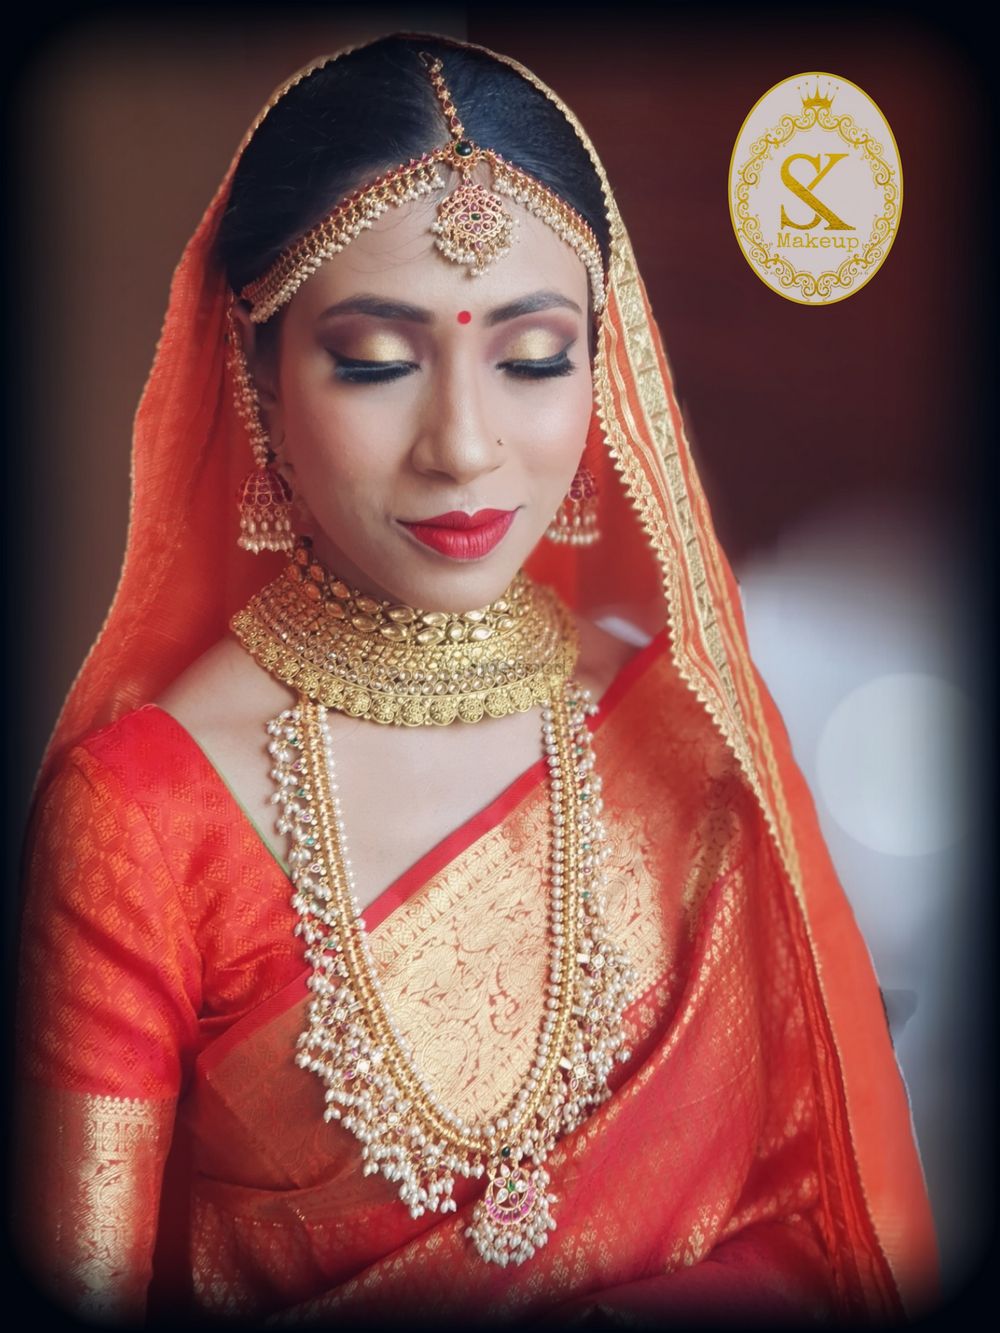 Photo From Southindian Bride by Simar Kaur - By Makeup by Simar Kaur